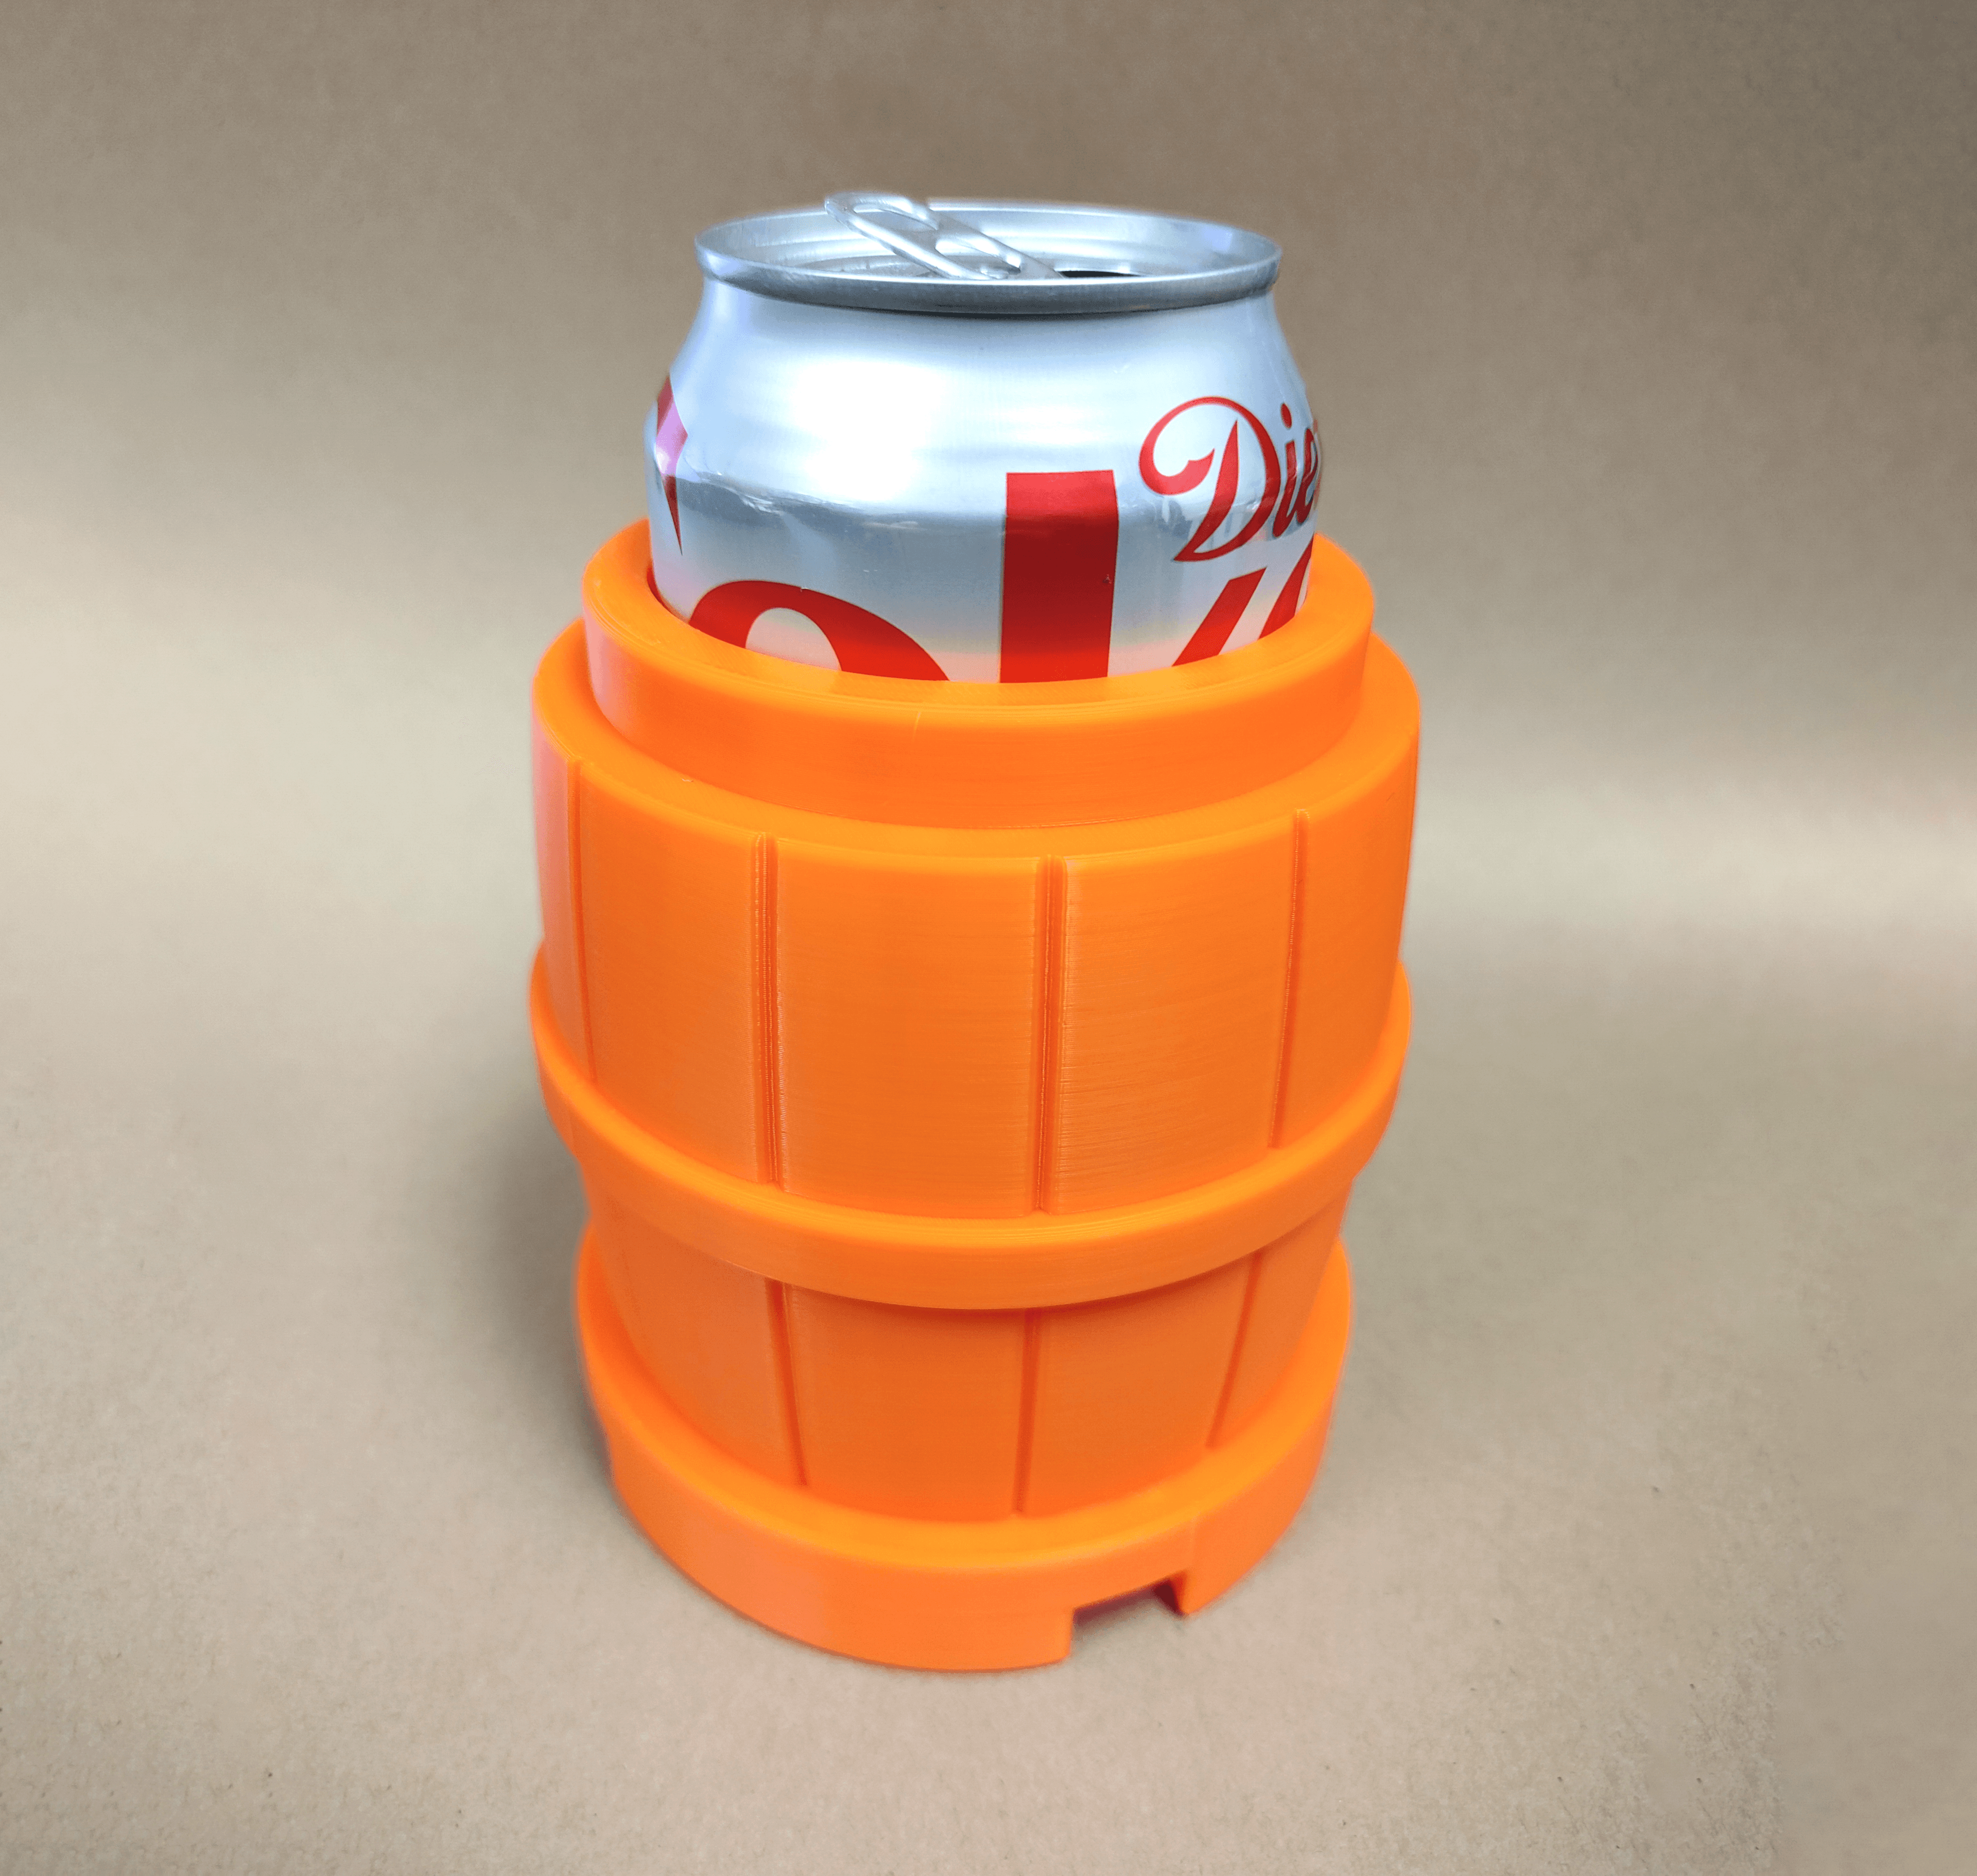 LEGO Barrel Can Coozie 3d model